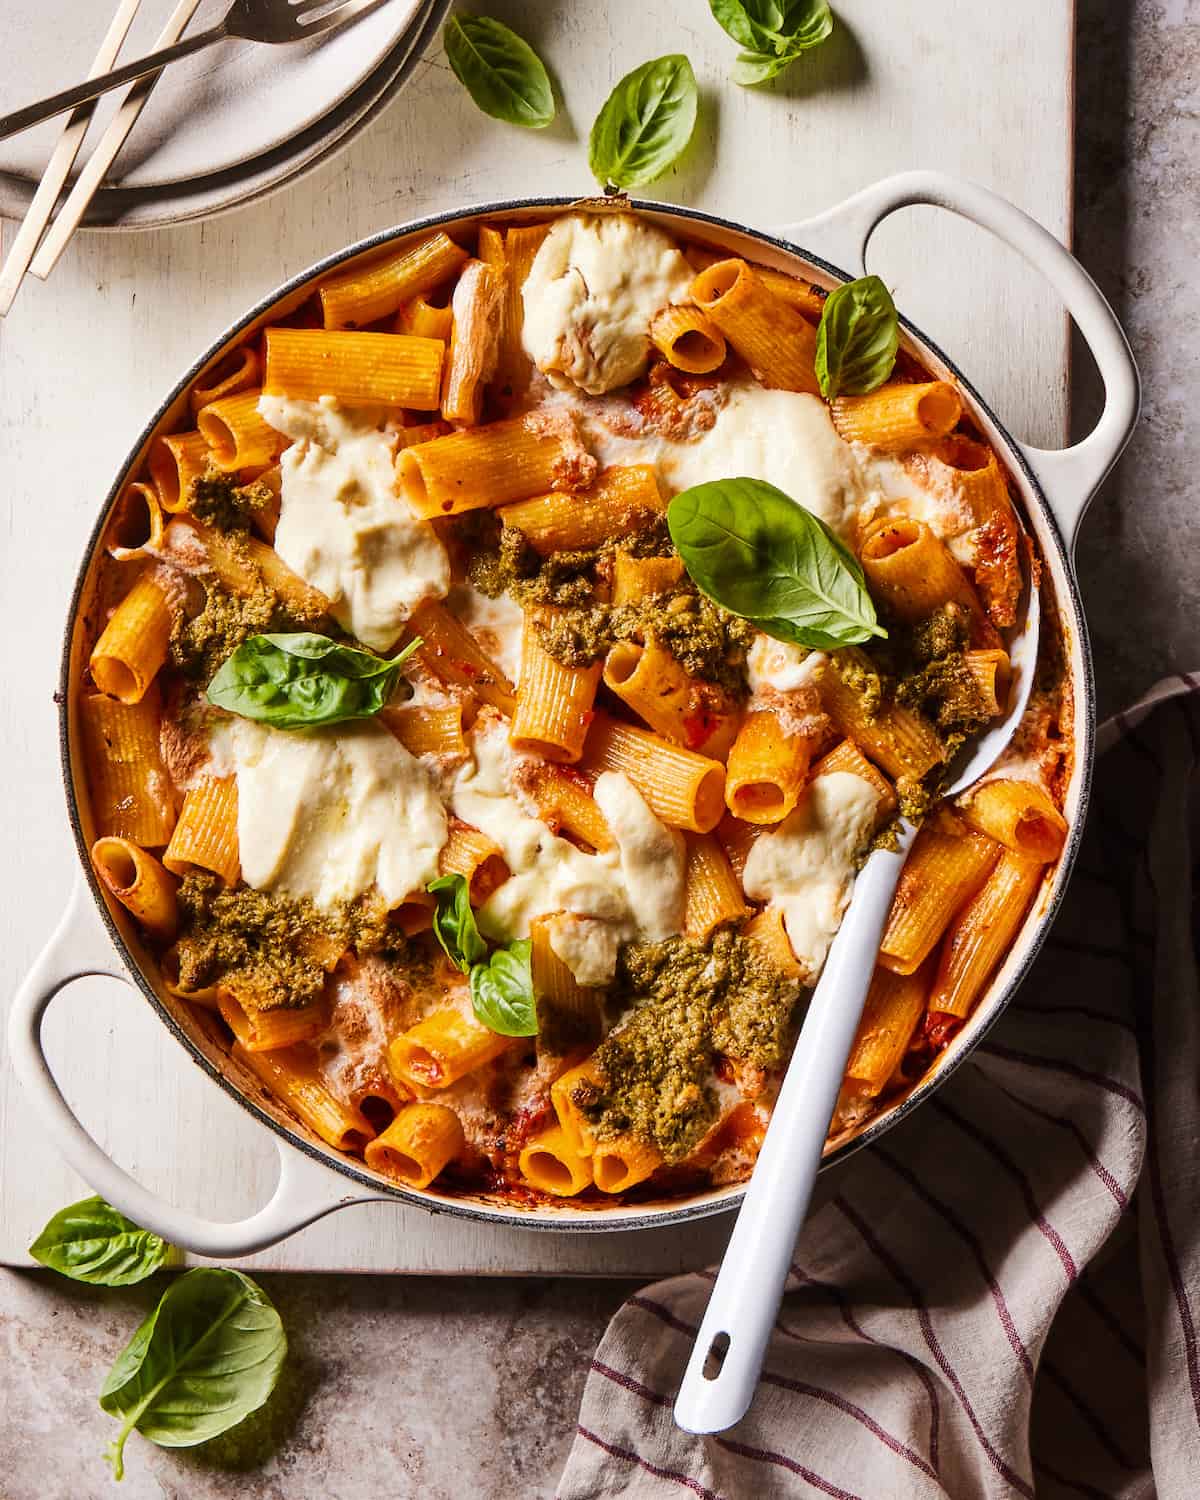 A white skillet with baked Rigatoni with ground chicken sausage, pesto and ricotta garnished with basil leaves, with a serving spoon, and placed on a wooden board and a kitchen towel with more basil leaves on the work surface.